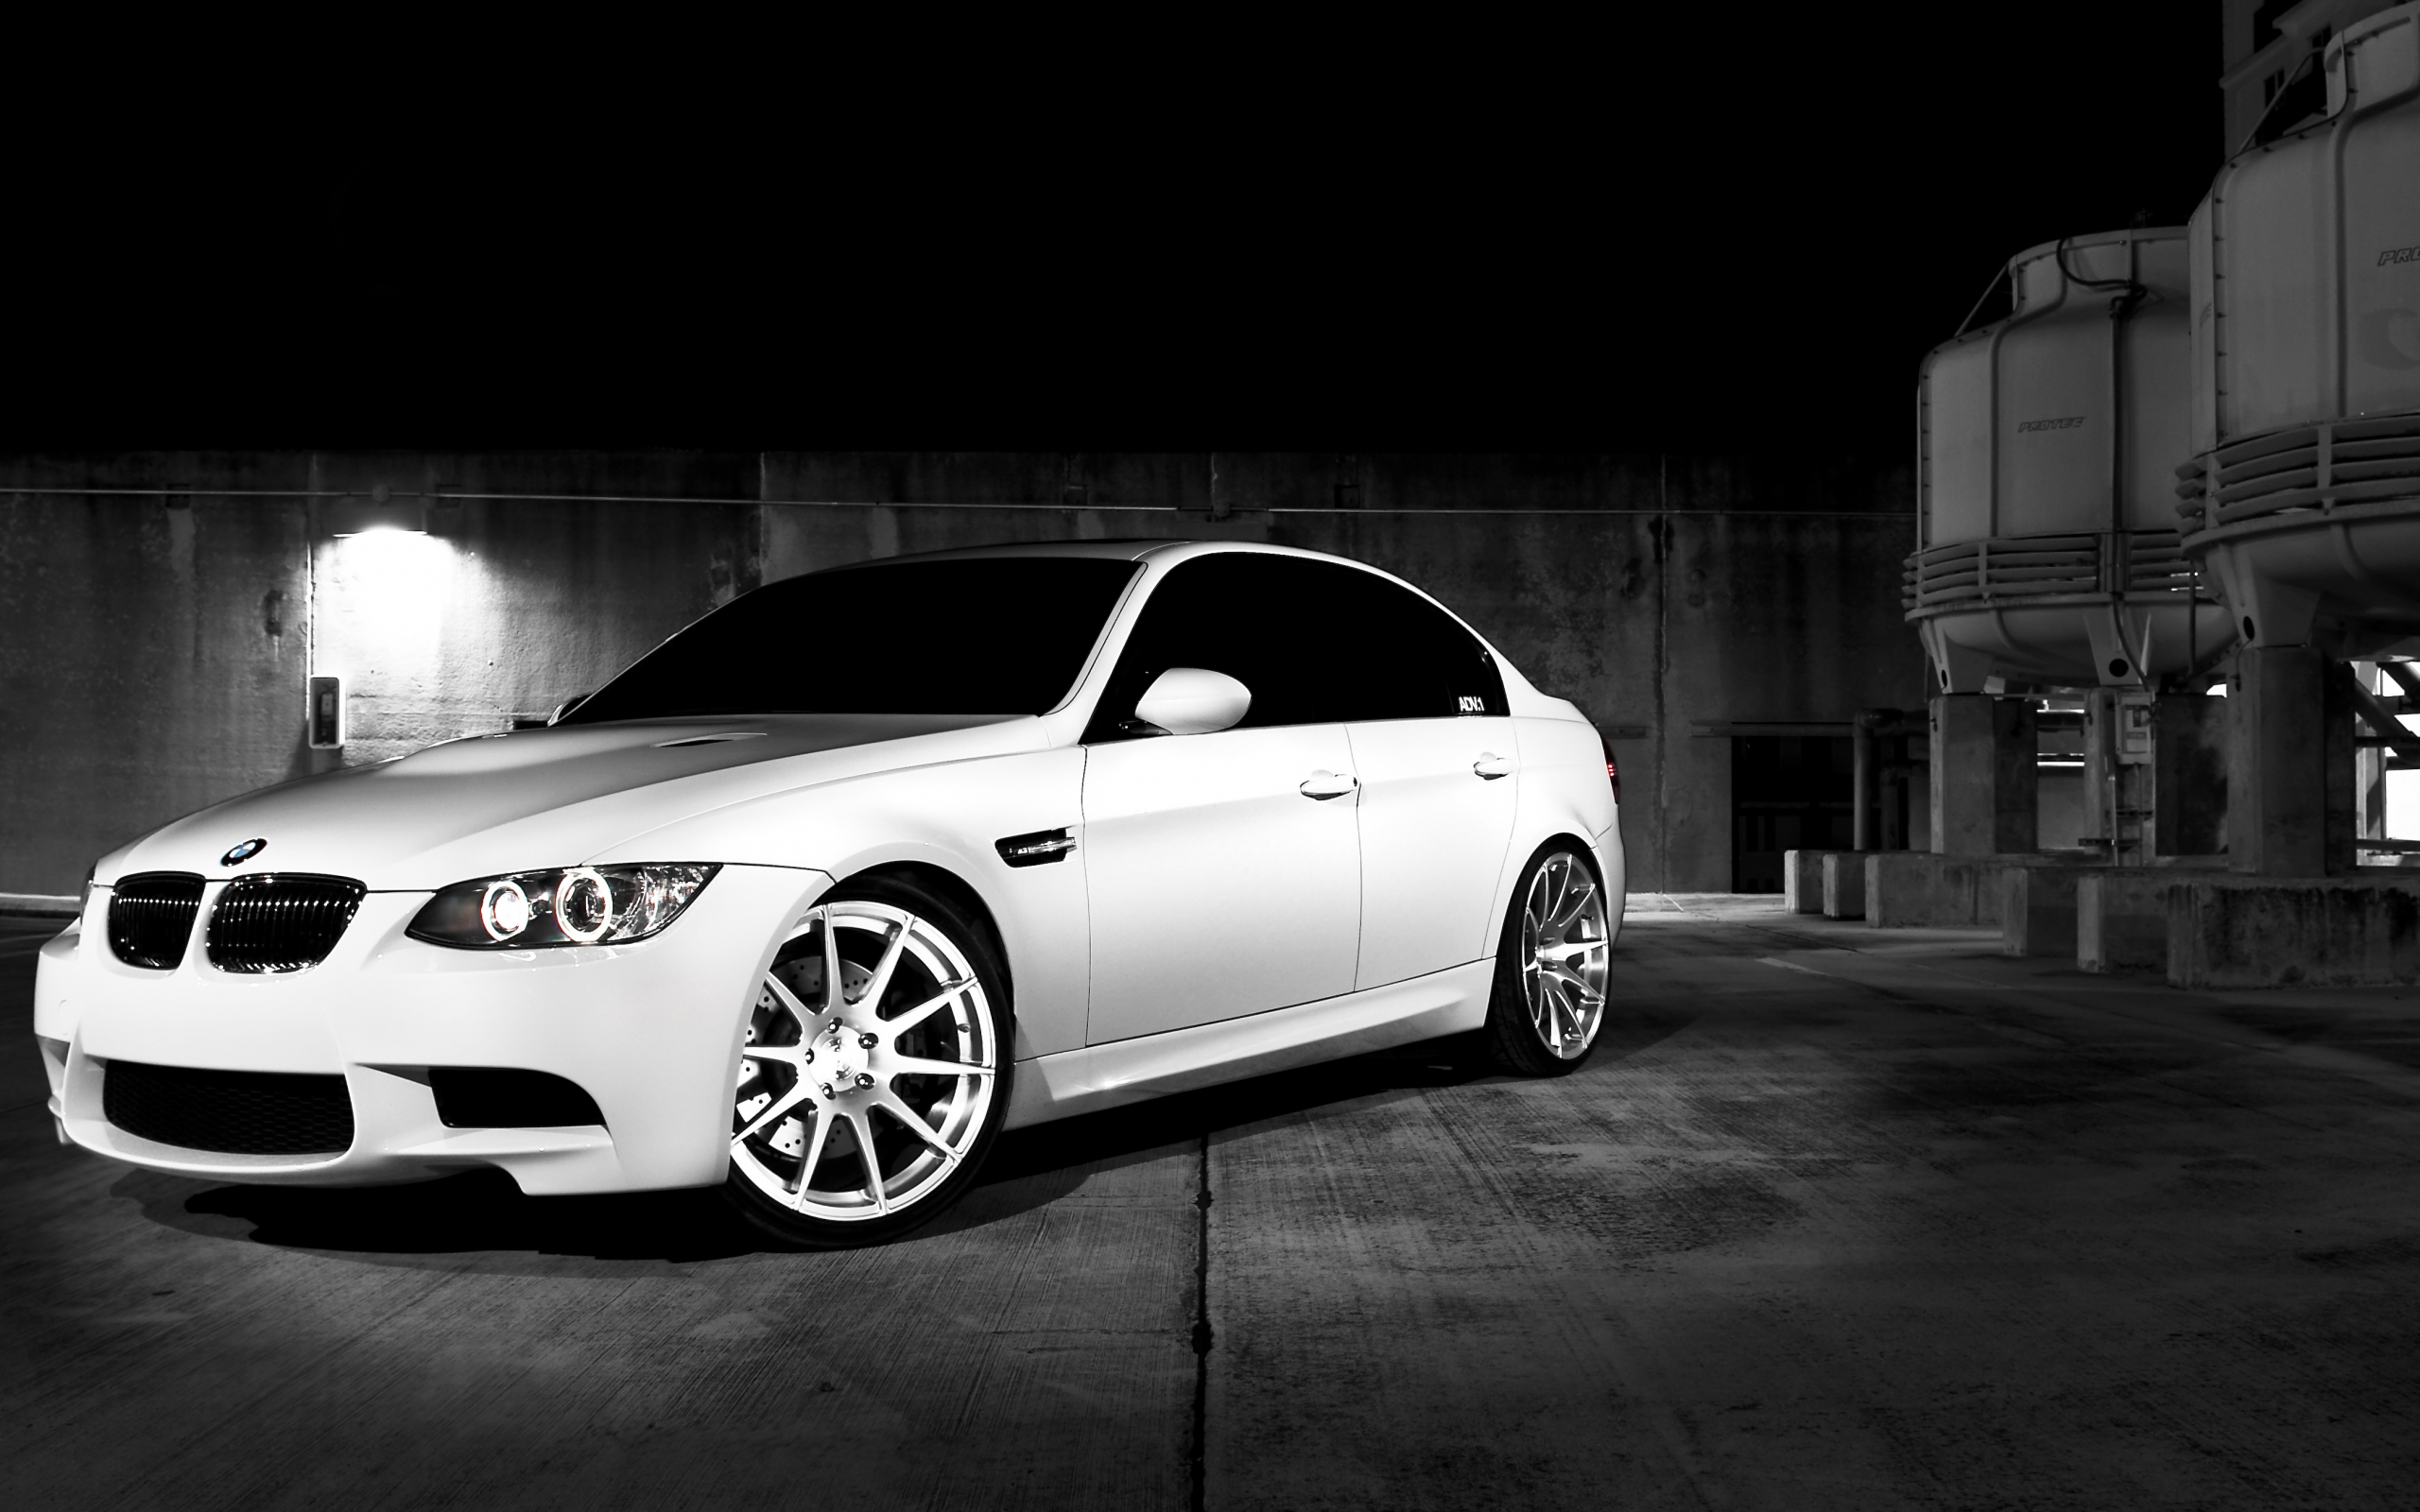 bmw m3, cars, auto, city, parcing, сars wall, бмв м3, wallpapers